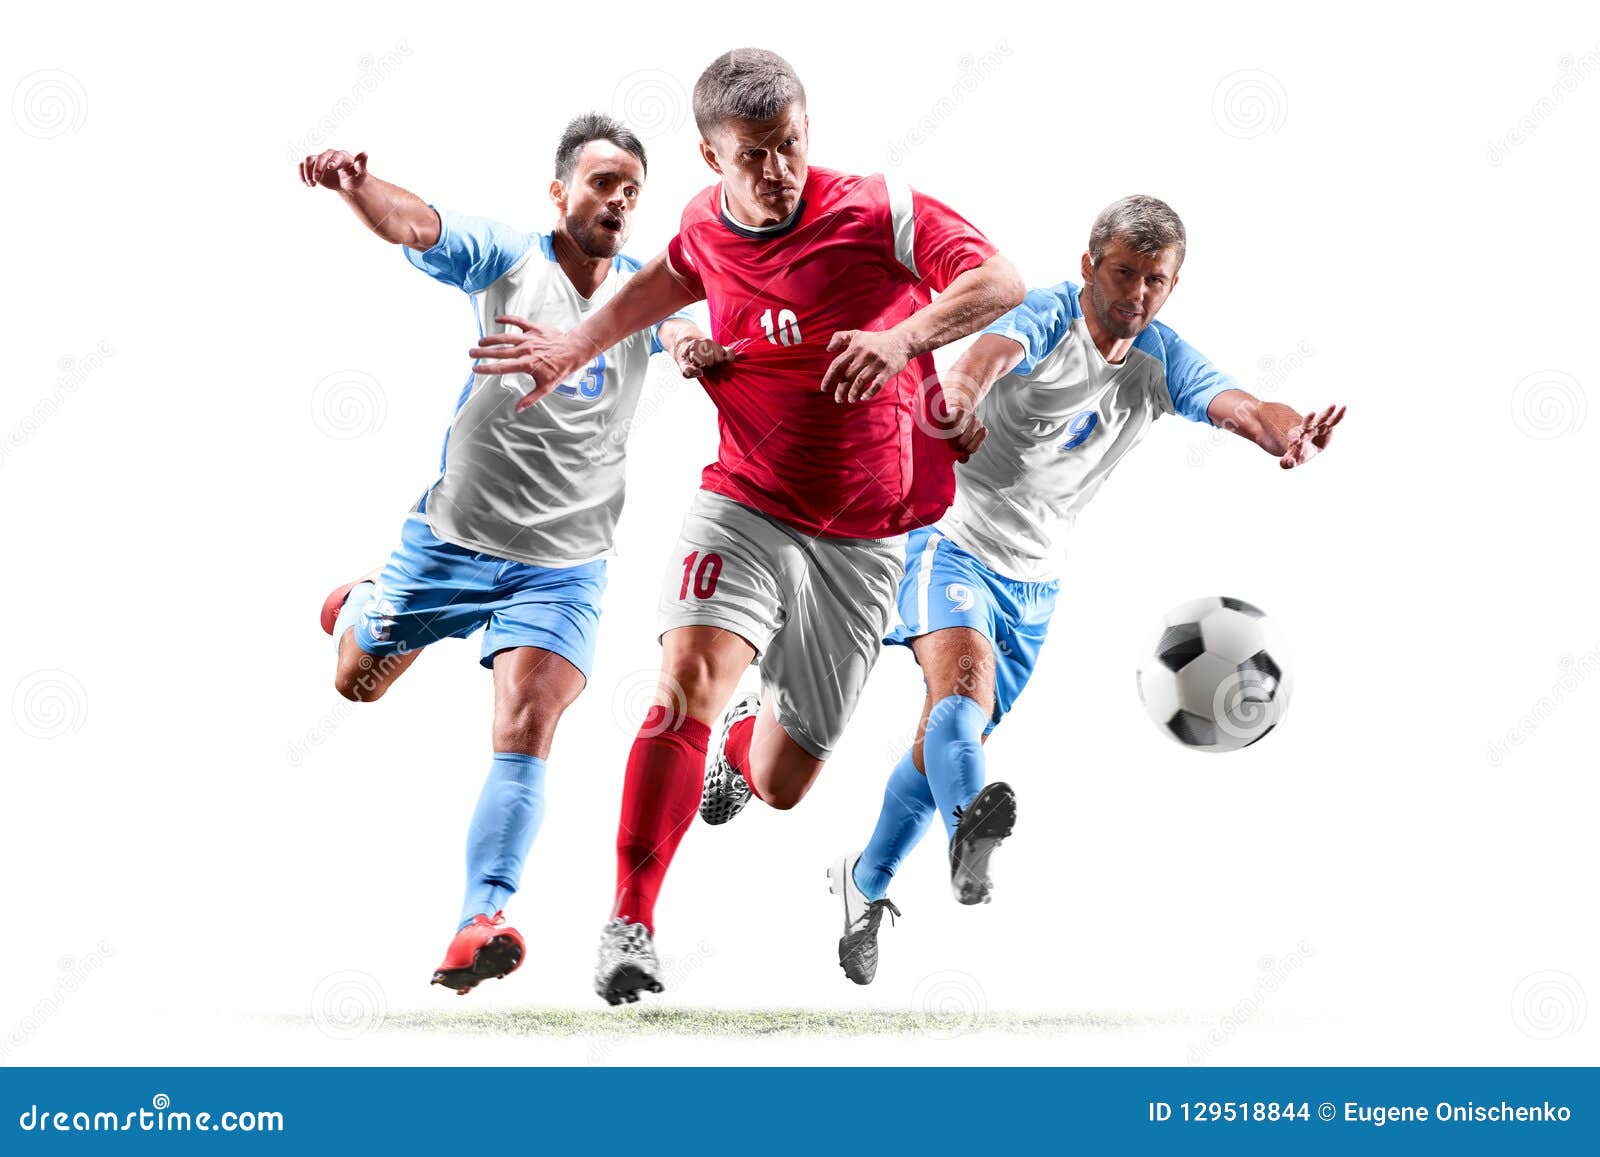 caucasian soccer players  on white background